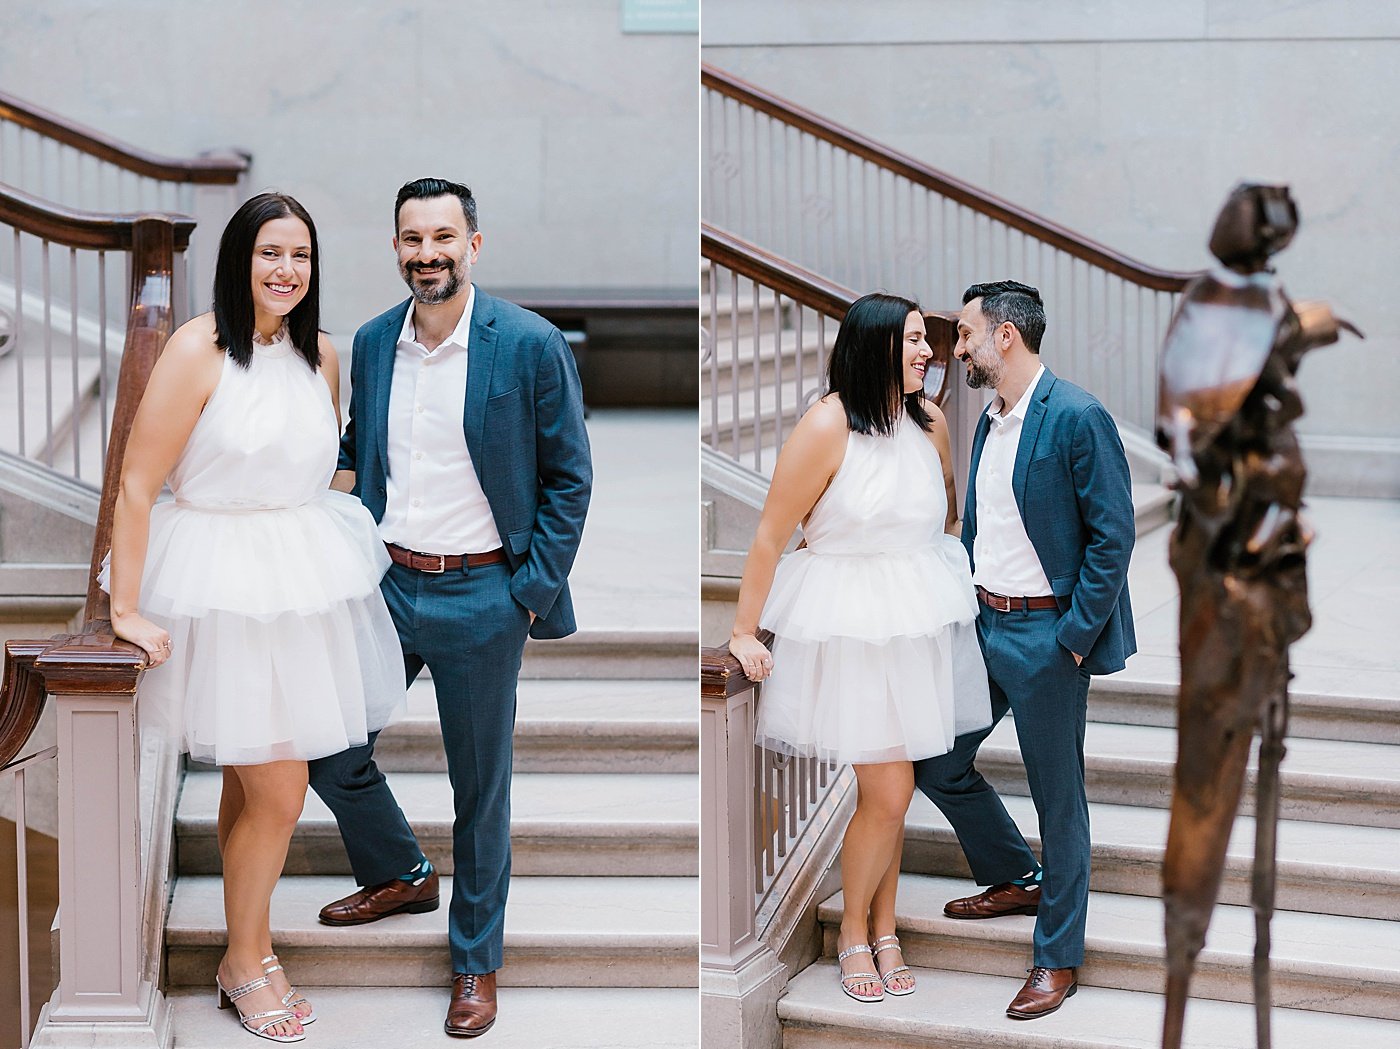 Rebecca Shehorn Photography Steven and Lindsey's Chicago Engagement Session-1.jpg